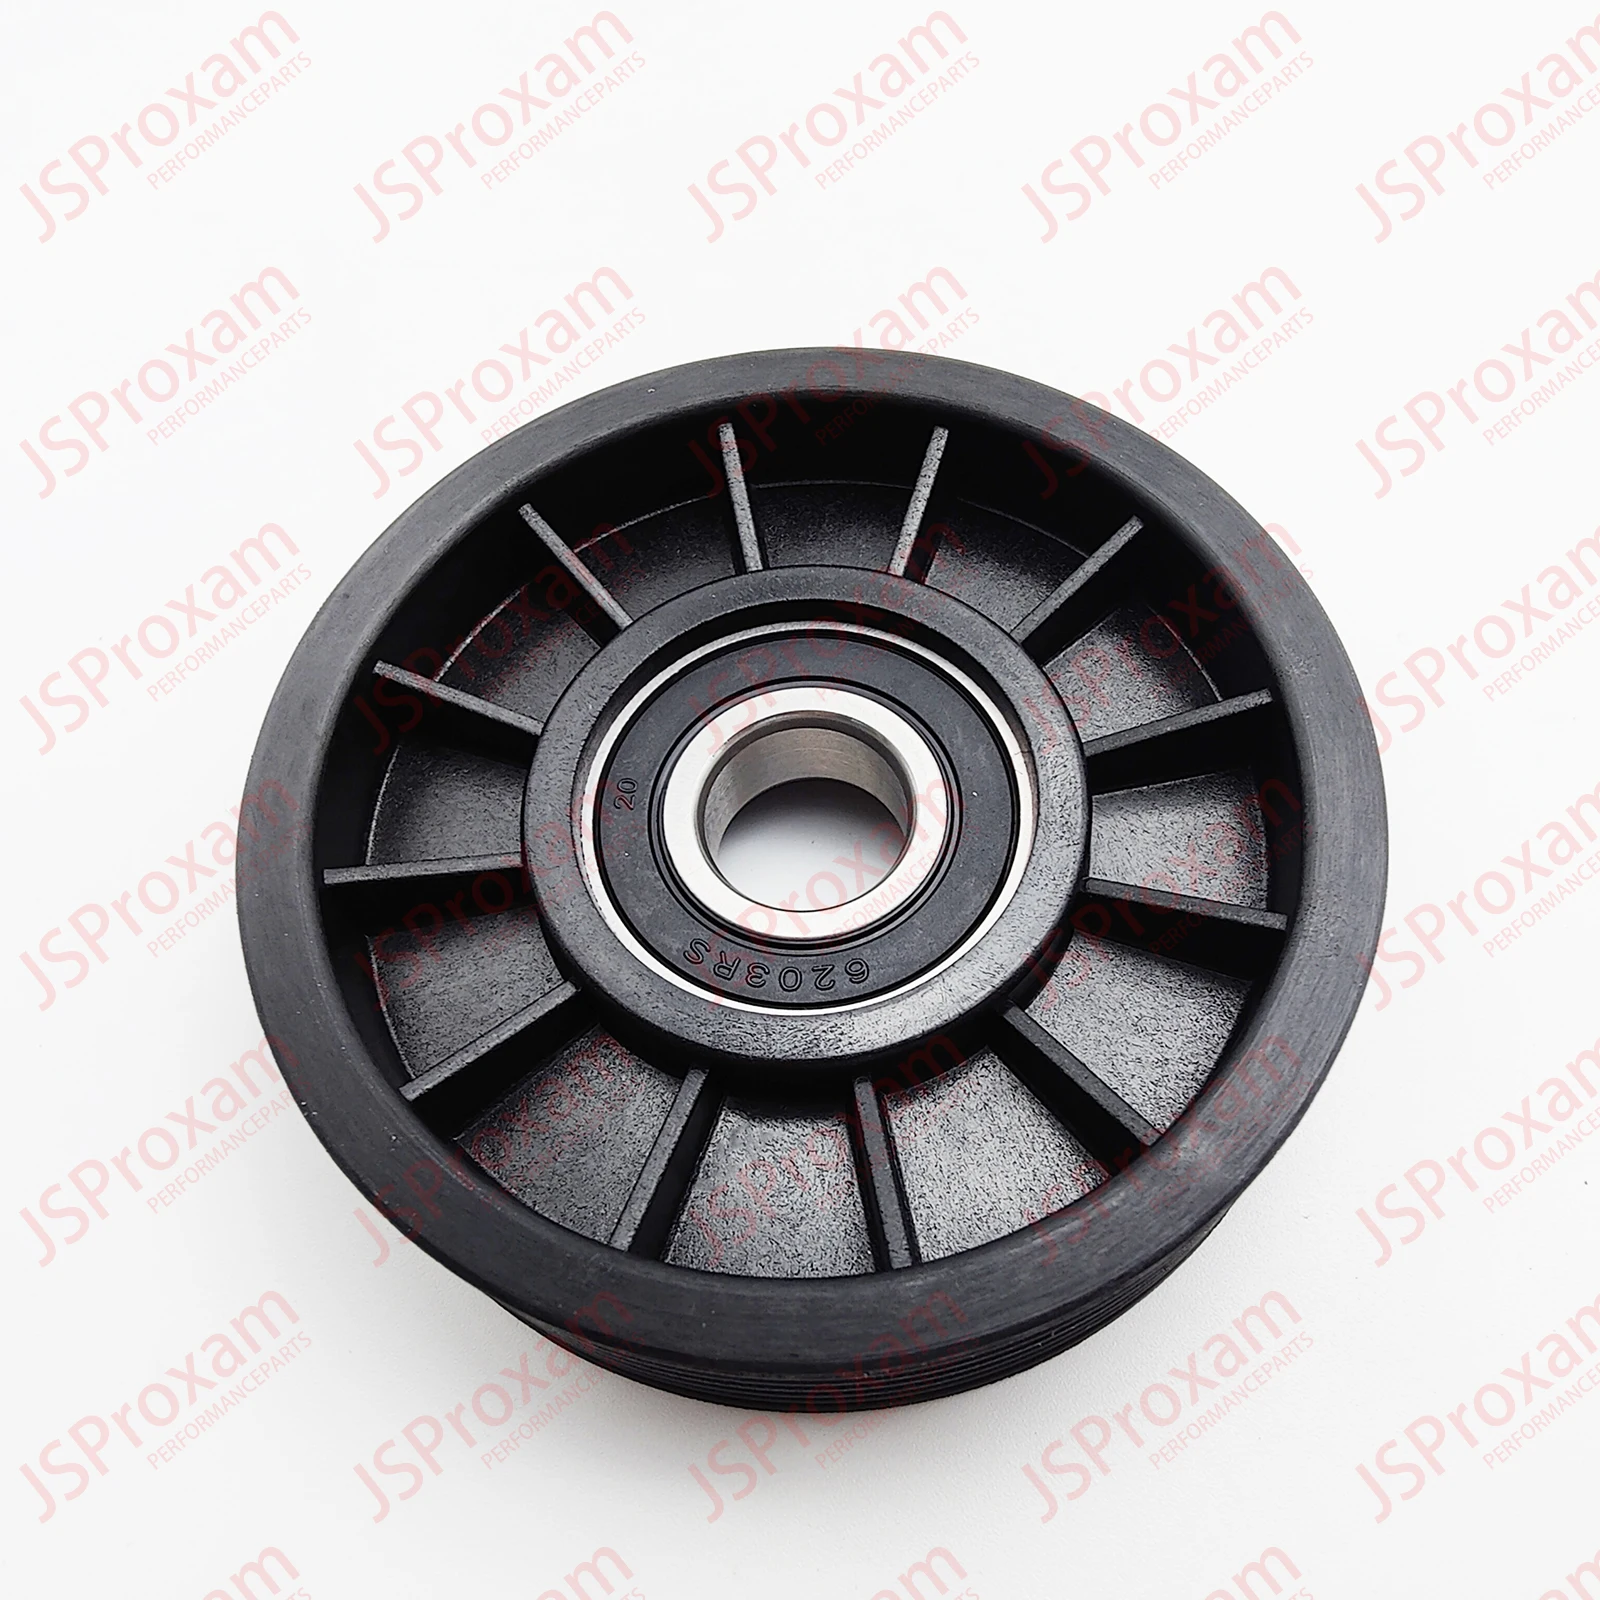 

865444T Replaces Fits For Mercruiser 865444t 496 5.7 350 MAG 8.1 New 3.5" SERPENTINE BELT PULLEY IDLER